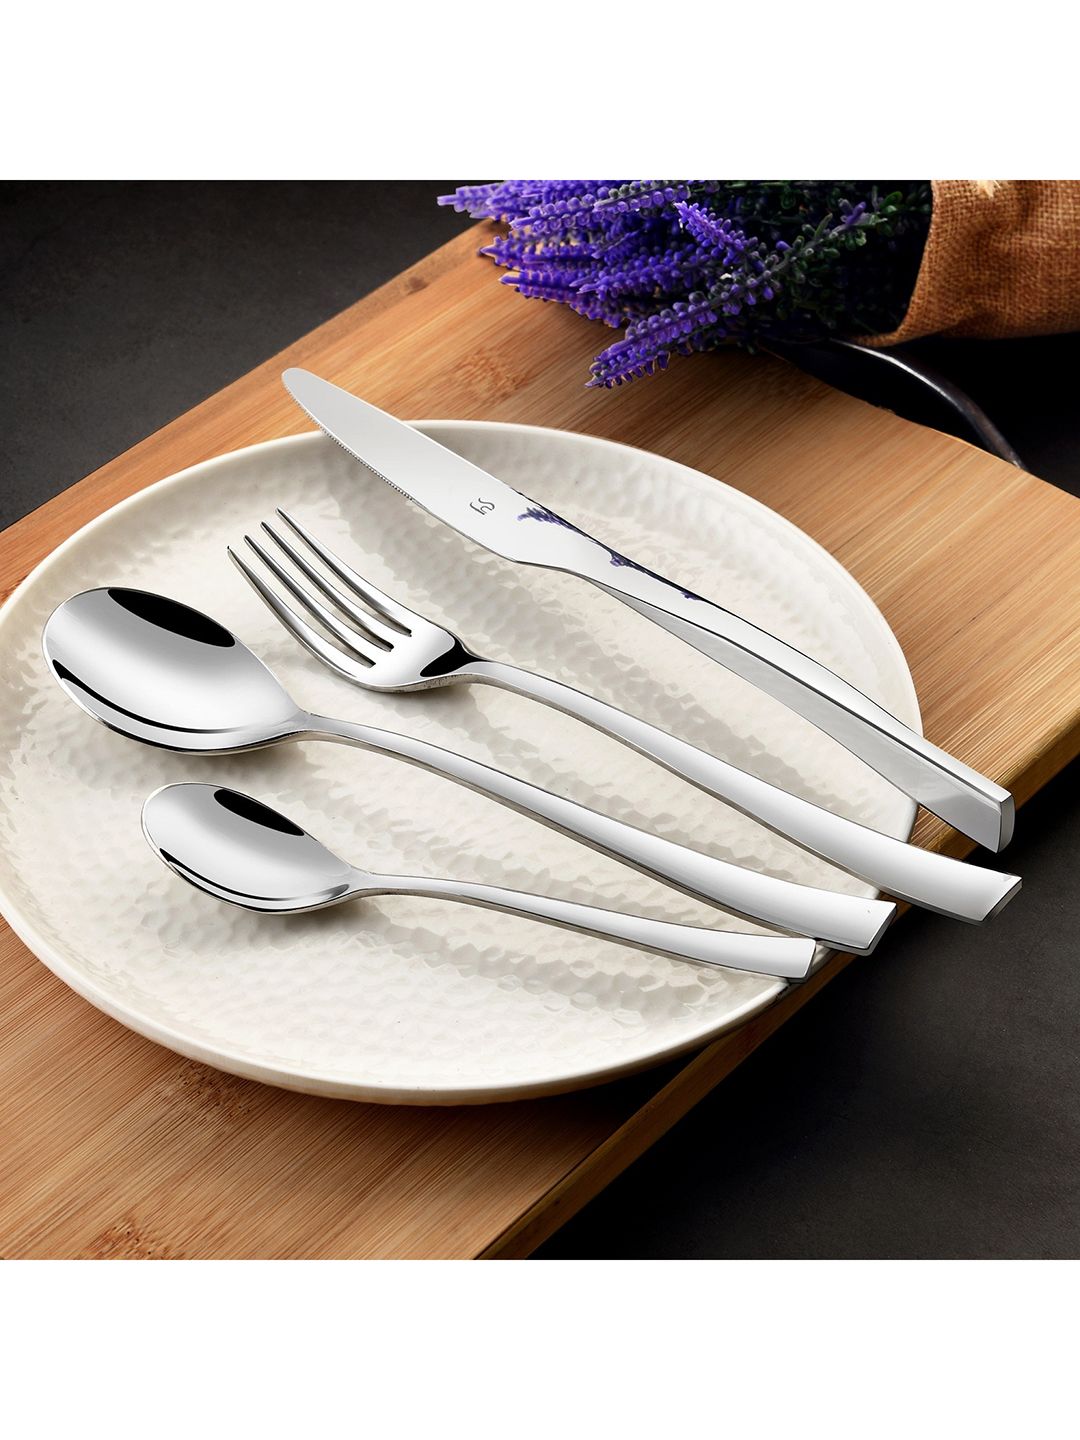 FNS Silver-Toned 26Pcs Stainless Steel Mixed Cutlery Set Price in India